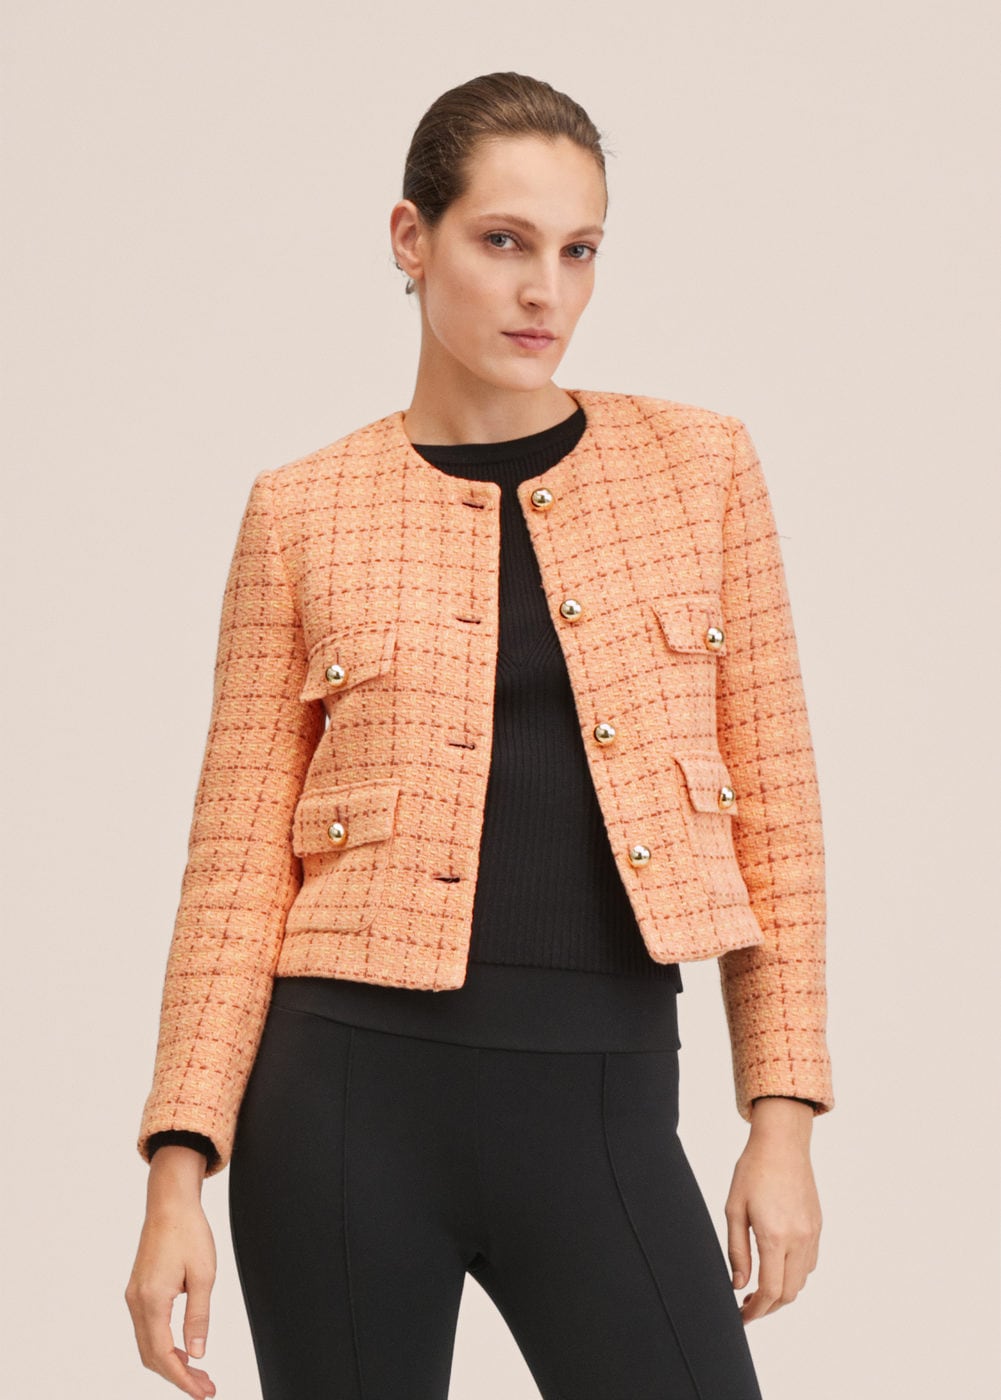 sport coats and suit jackets Womens Clothing Jackets Blazers Maliparmi Tweed Suit Jacket in Orange 